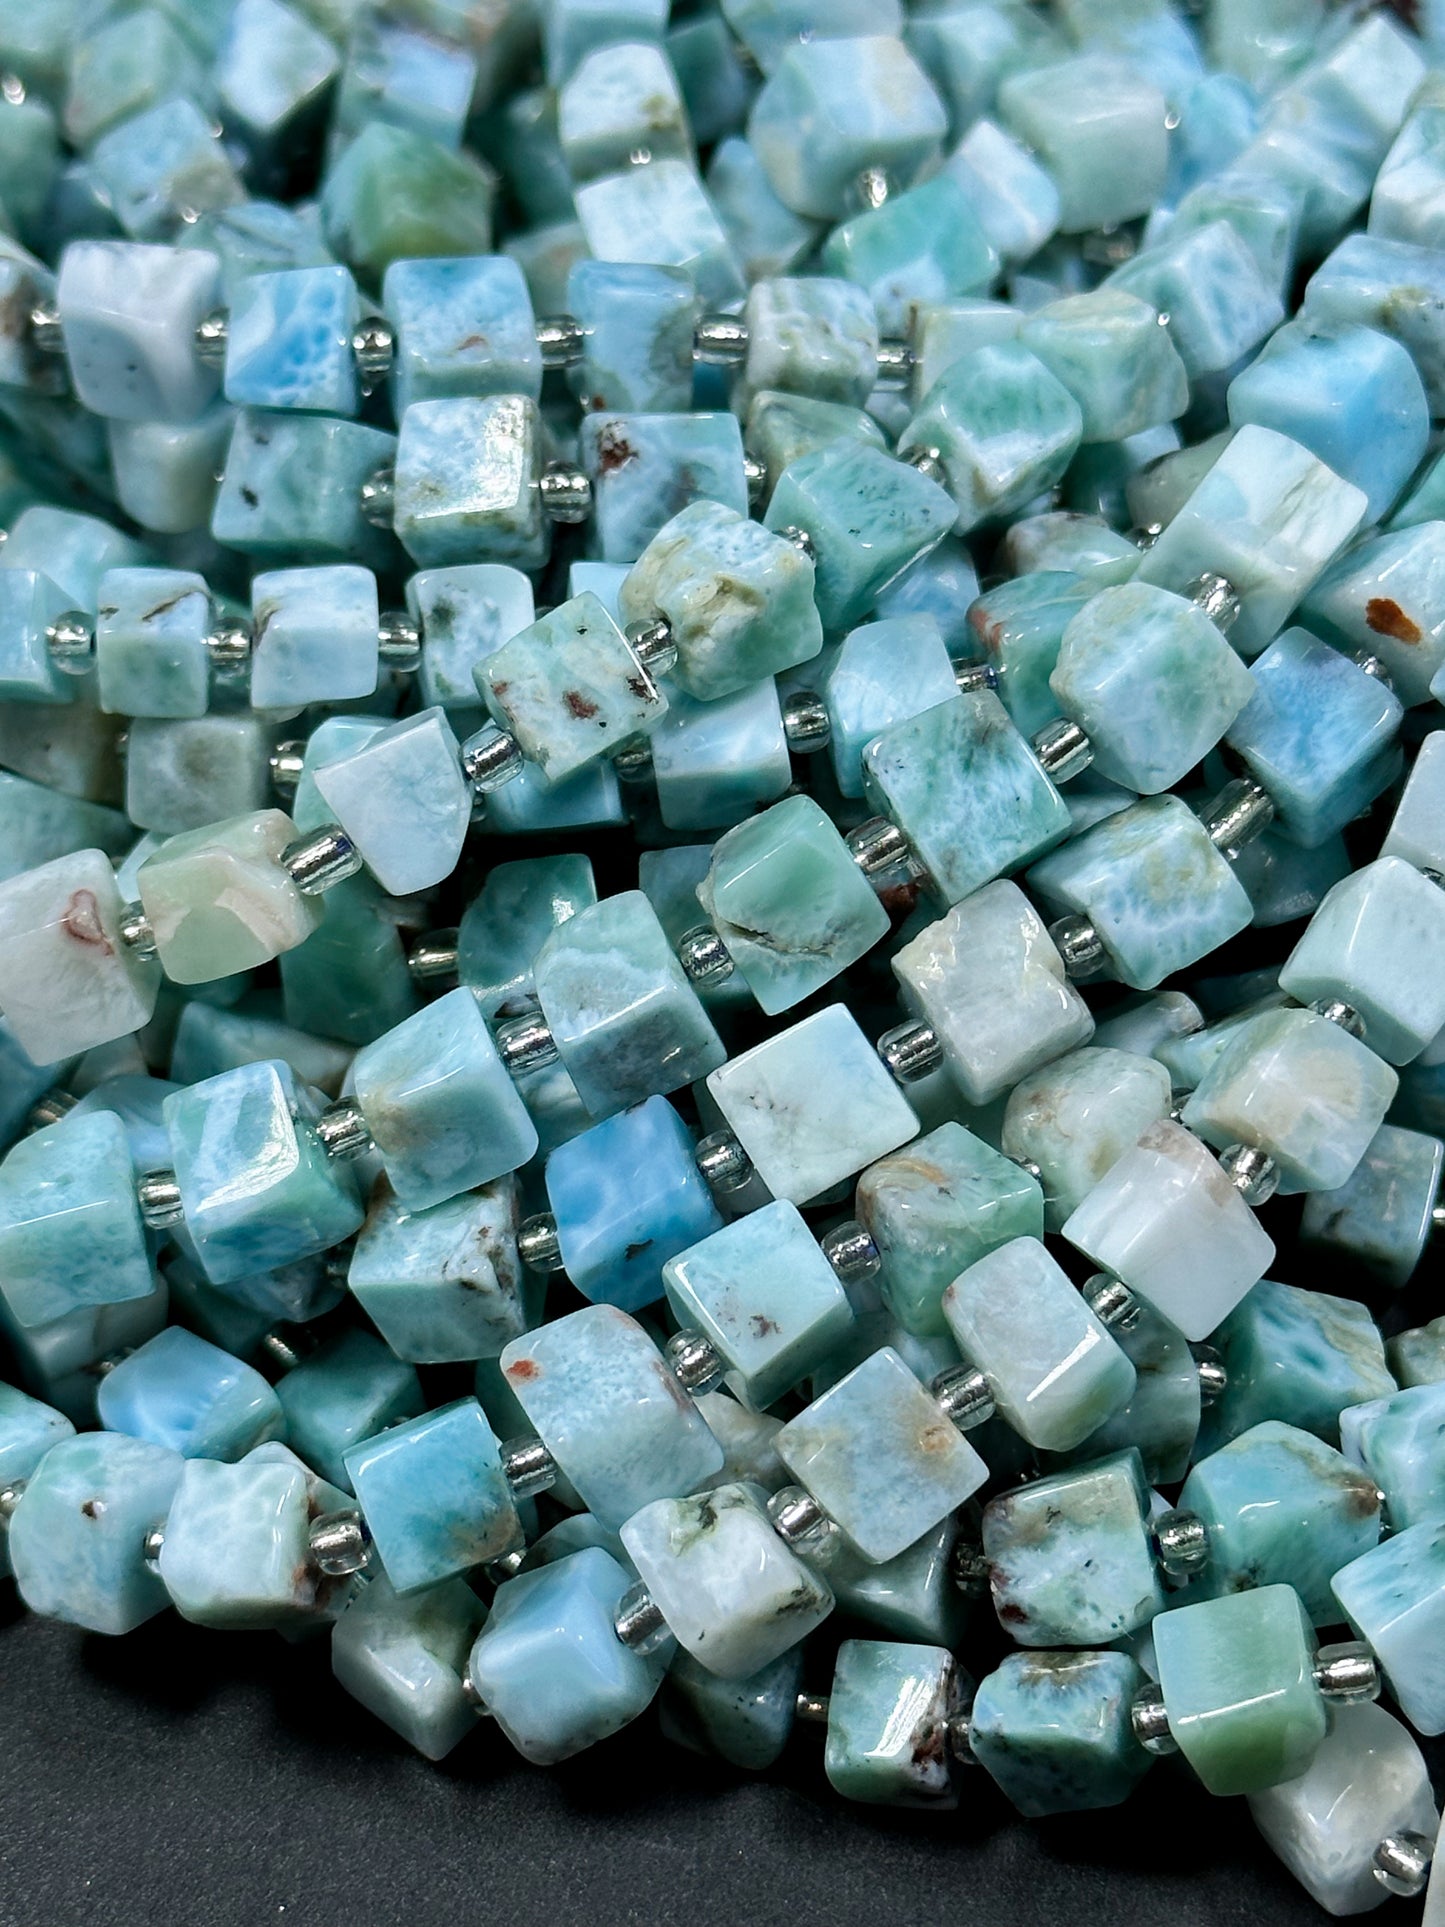 AAA Natural Larimar Gemstone Bead 6mm Cube Shape, Beautiful Natural Blue Color Larimar Gemstone Bead, Excellent High Quality 15.5" Strand